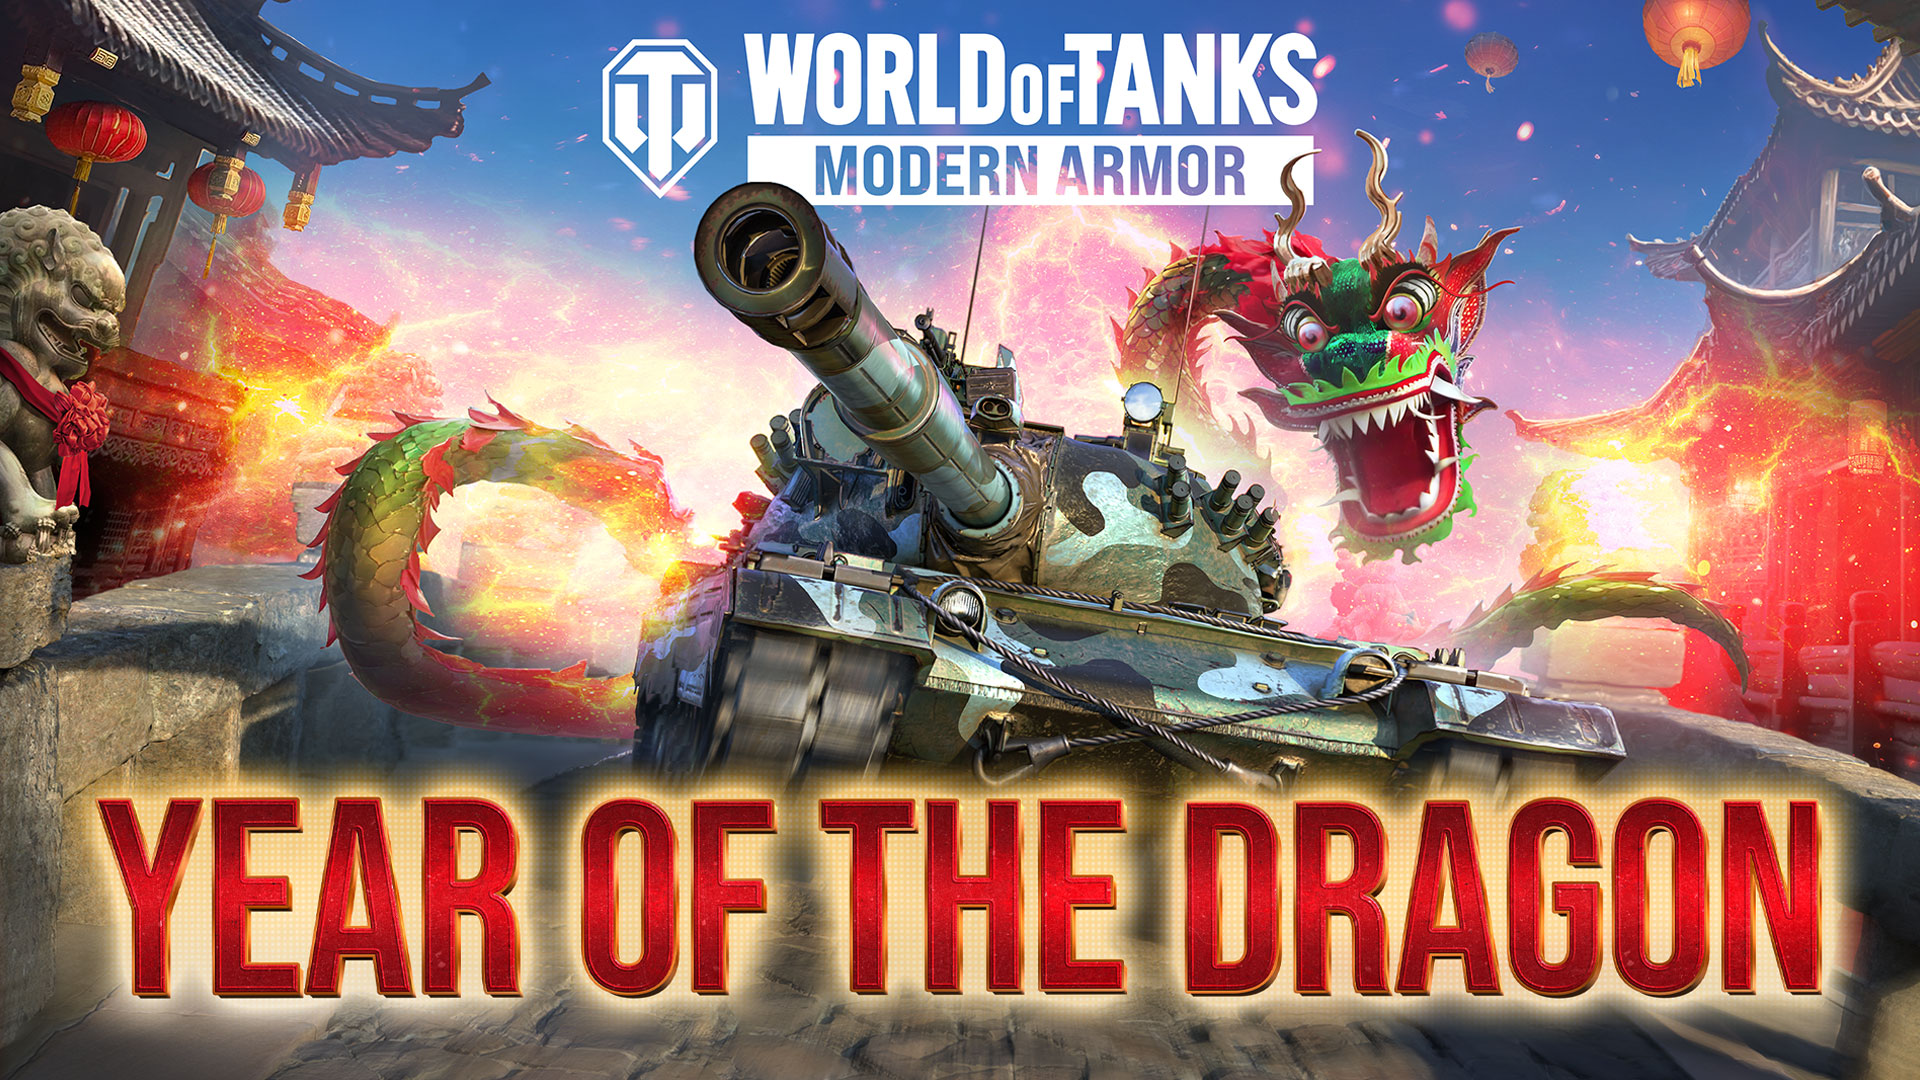 World of Tanks Year of the Dragon image